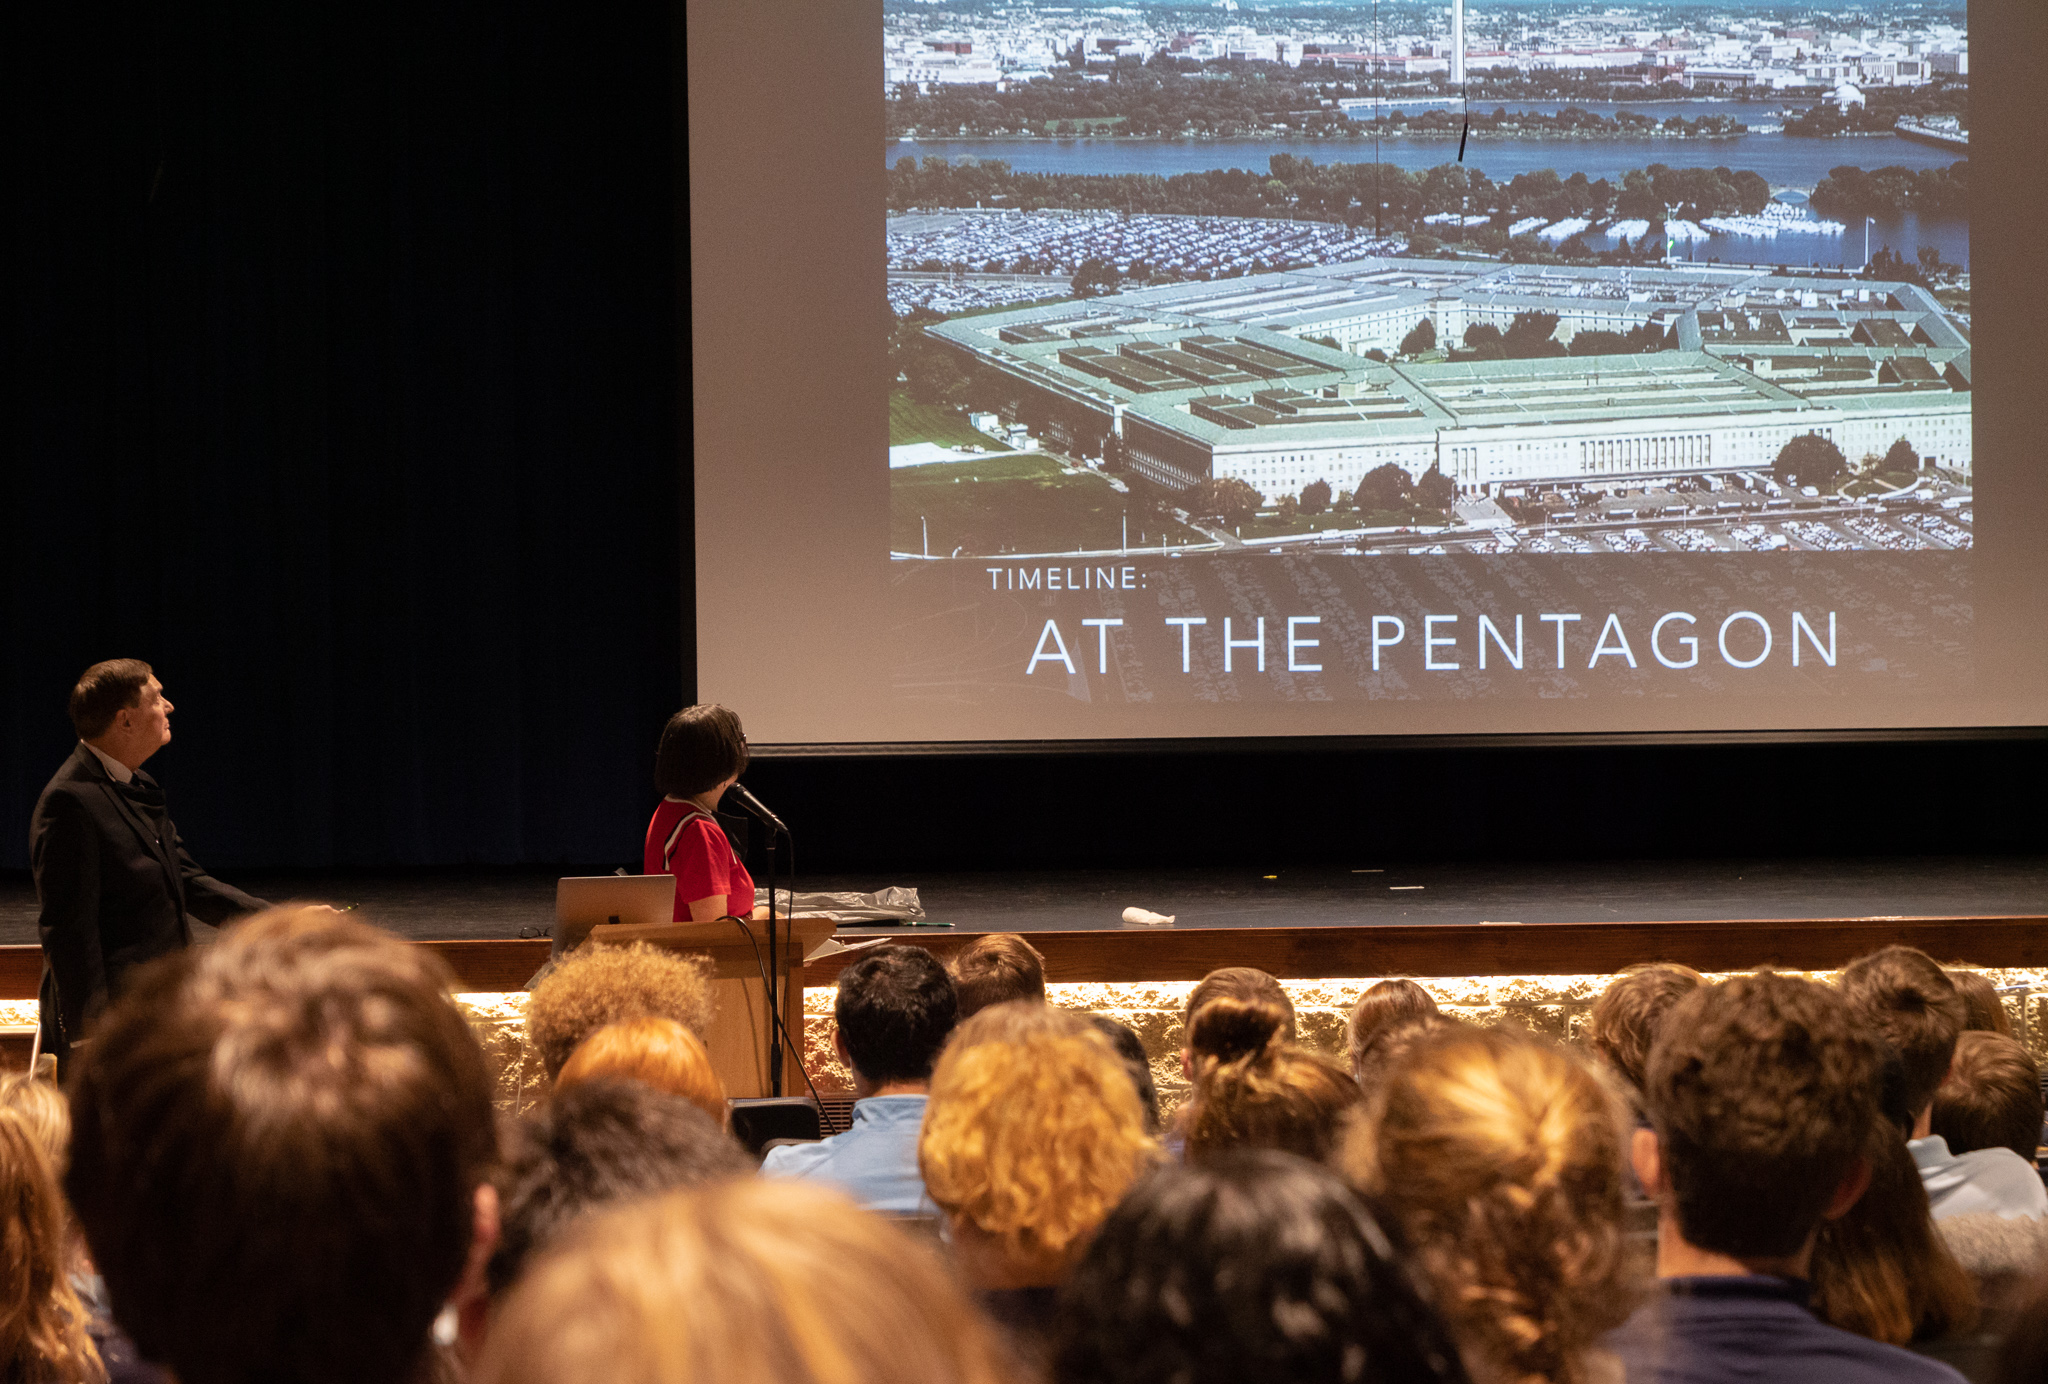 Senior students are in the auditorium watching a presentation on The Pentagon.